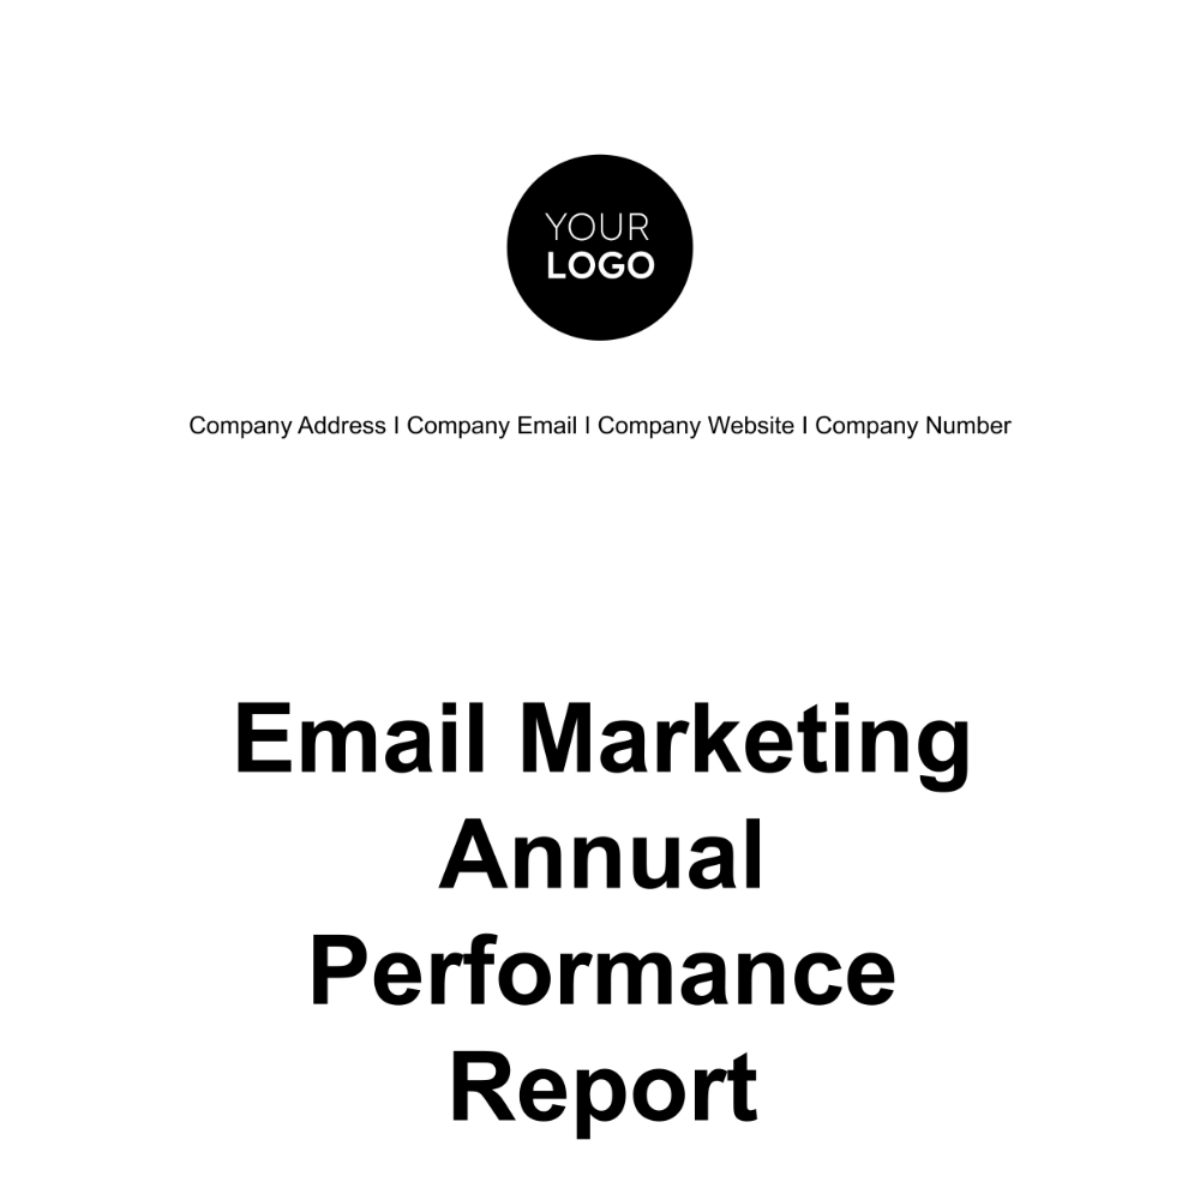 Free Email Marketing Annual Performance Report Template